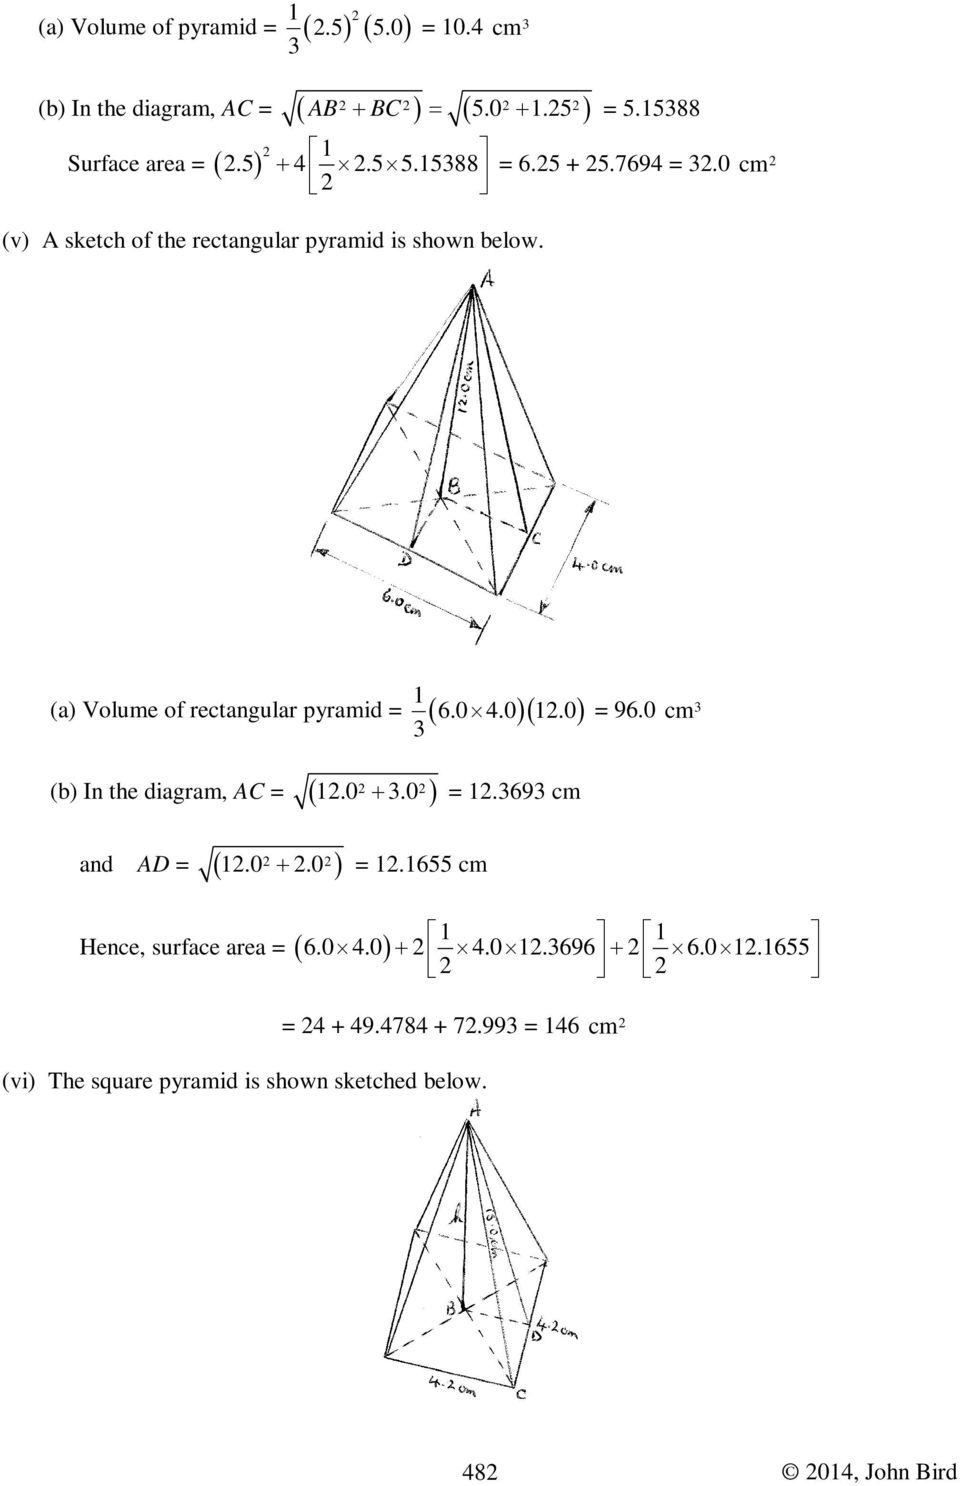 0 cm (a) Volume of rectangular pyramid = ( )( ) (b) In the diagram, AC = ( 1.0.0) and AD = ( 1.0.0) + = 1.69 cm + = 1.